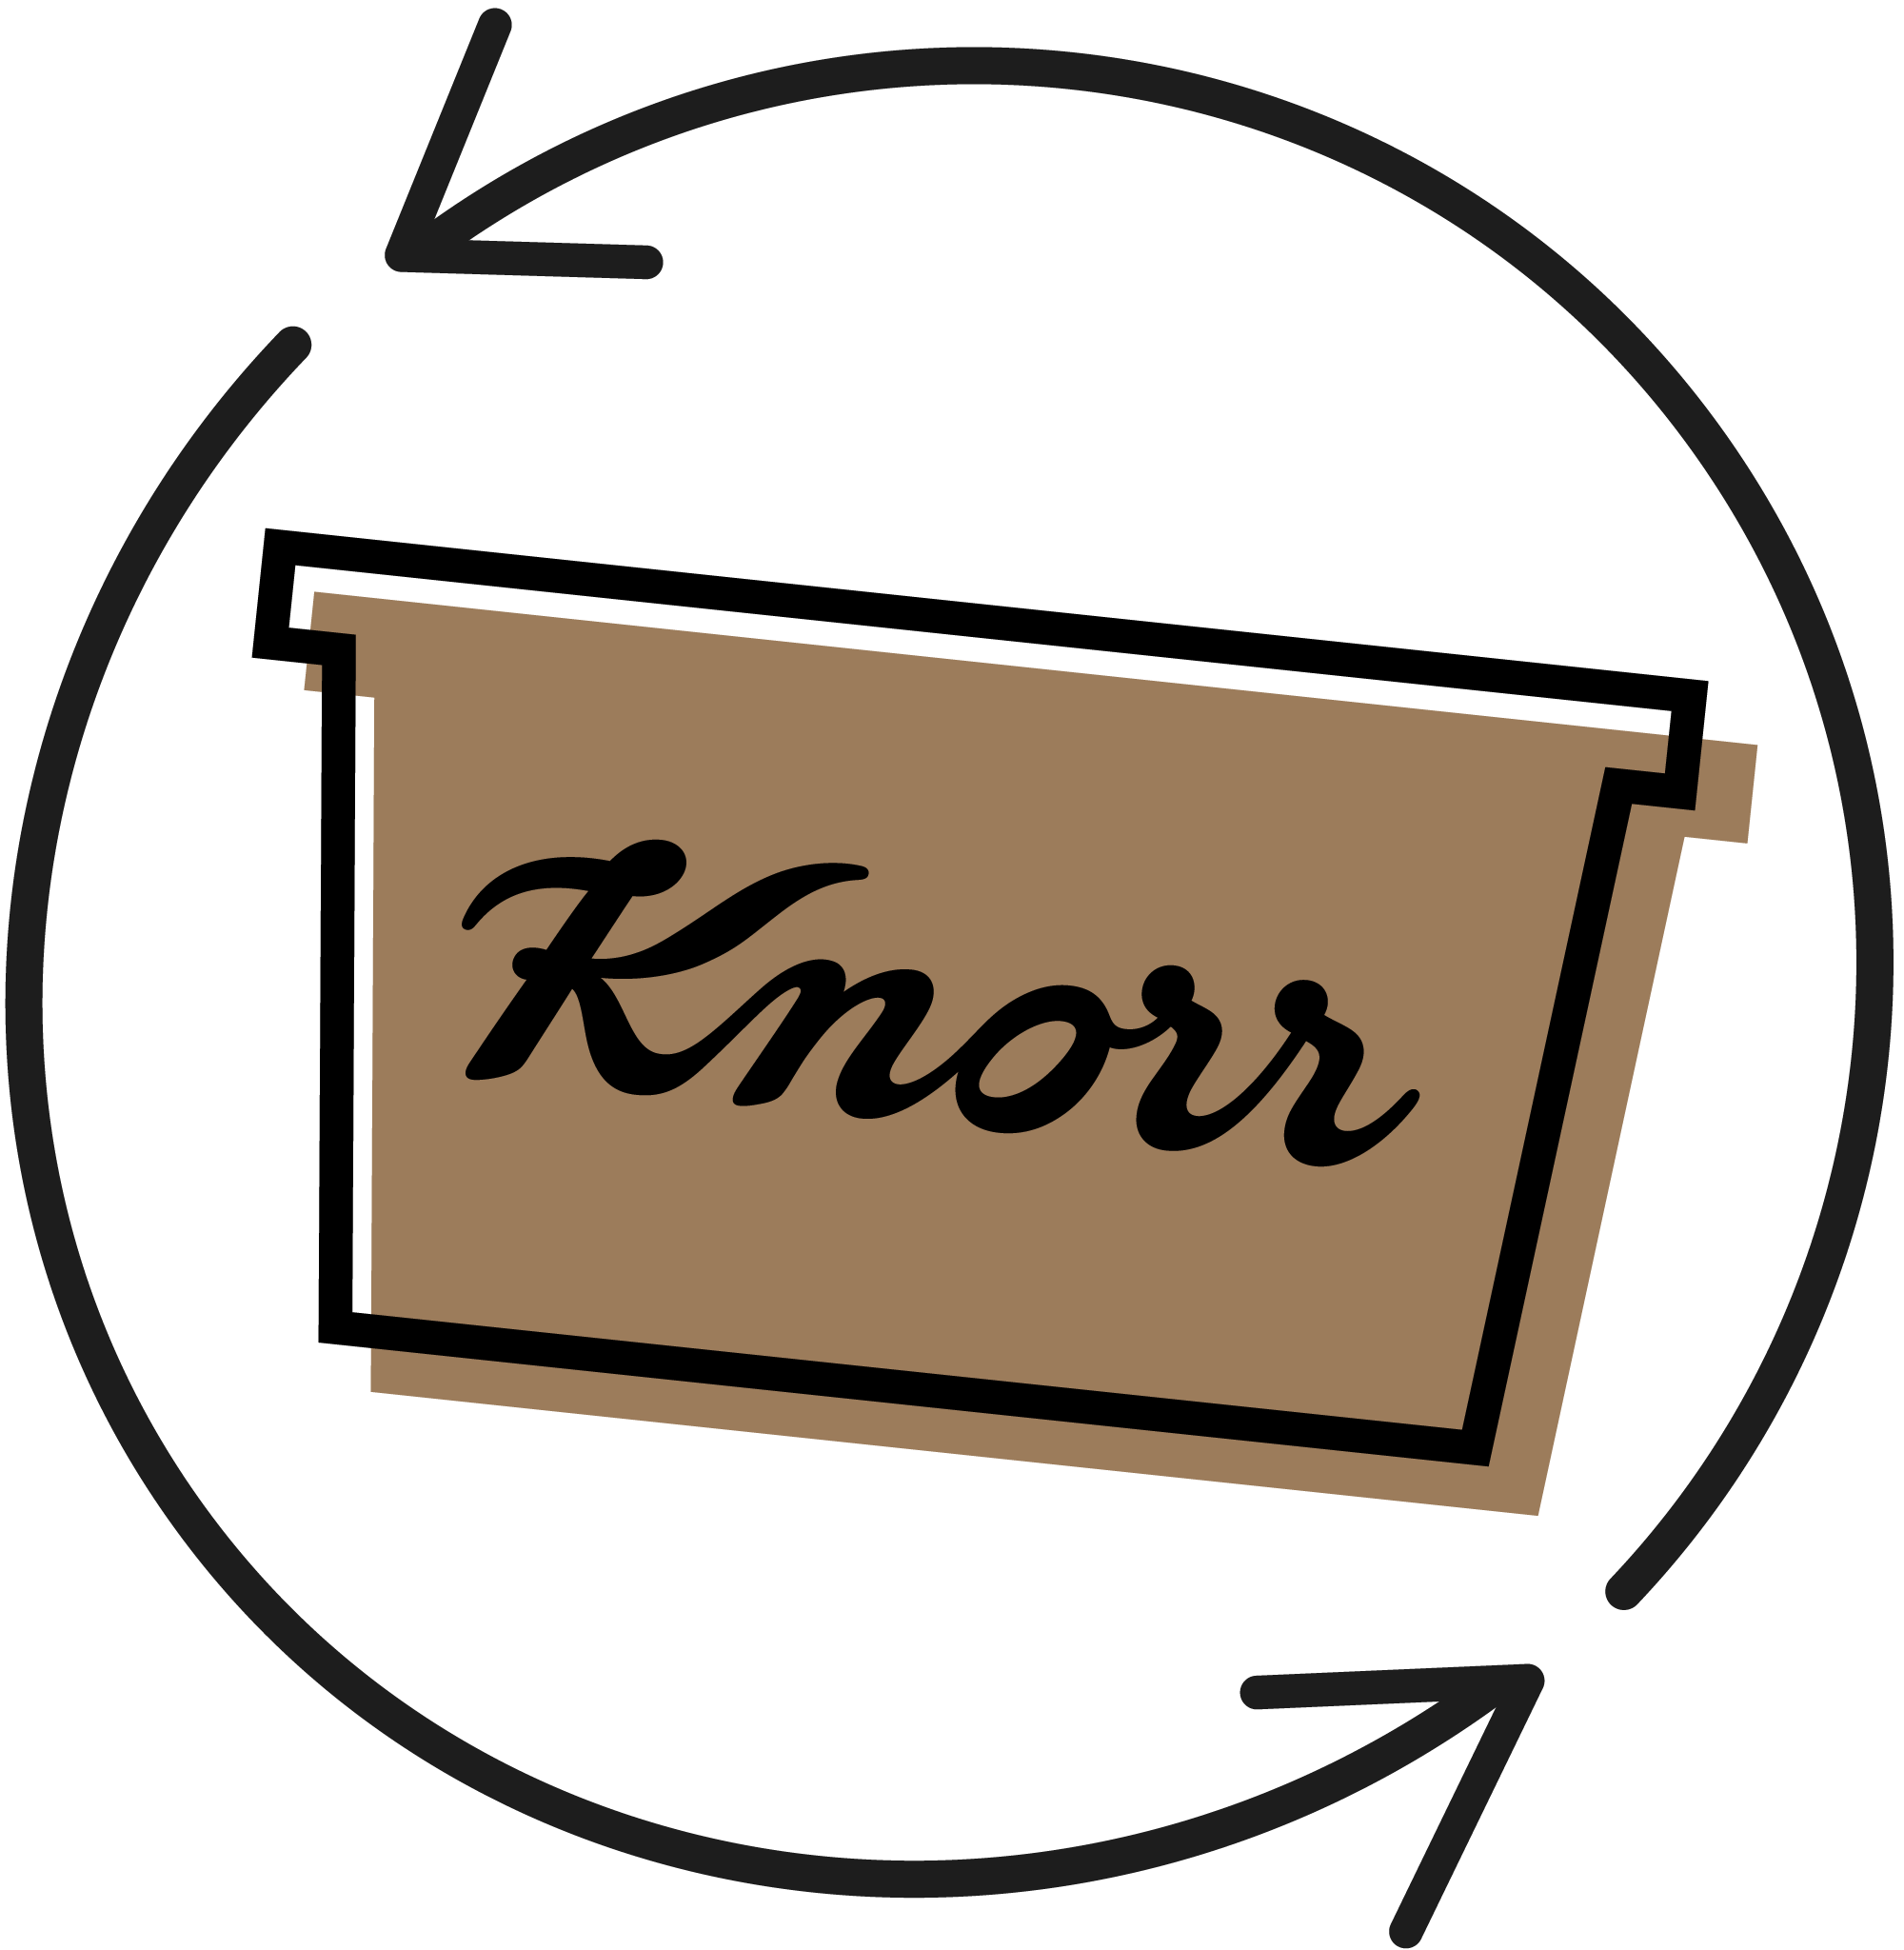 Knorr stock pot packaging